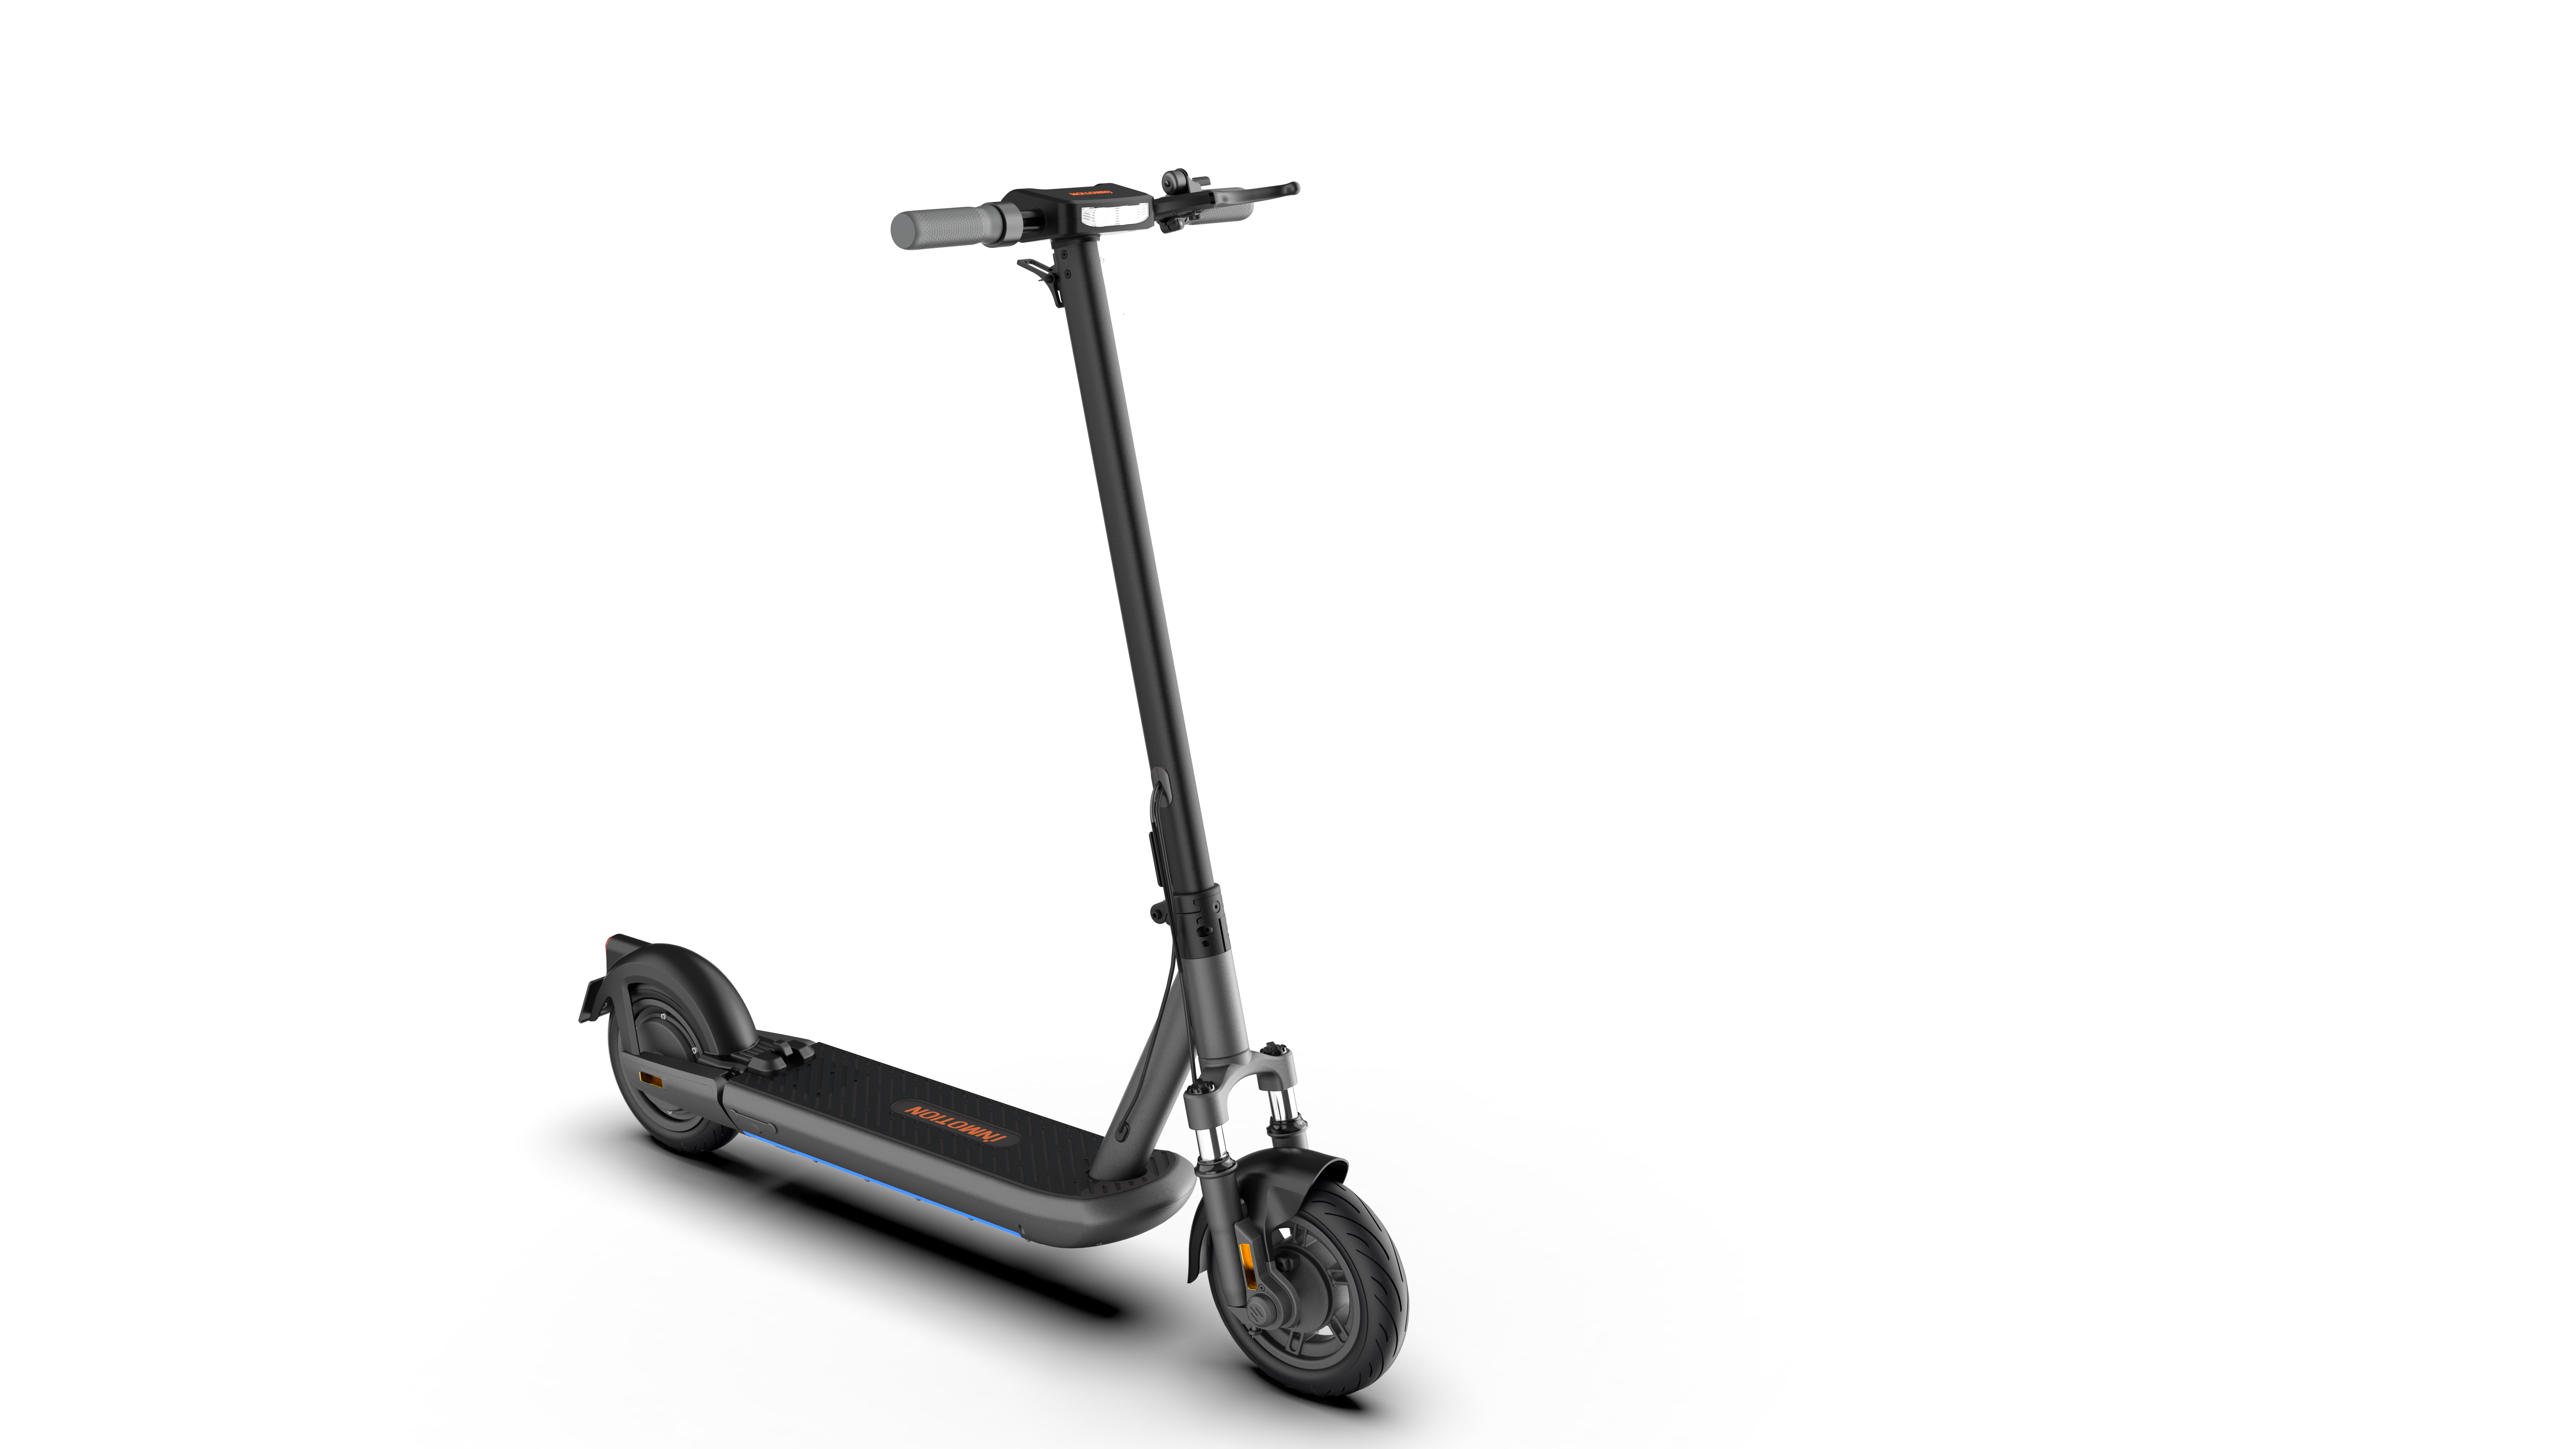 In this post, we introduce best 5 long range electric scooters, analyze the pros and cons of each respectively.